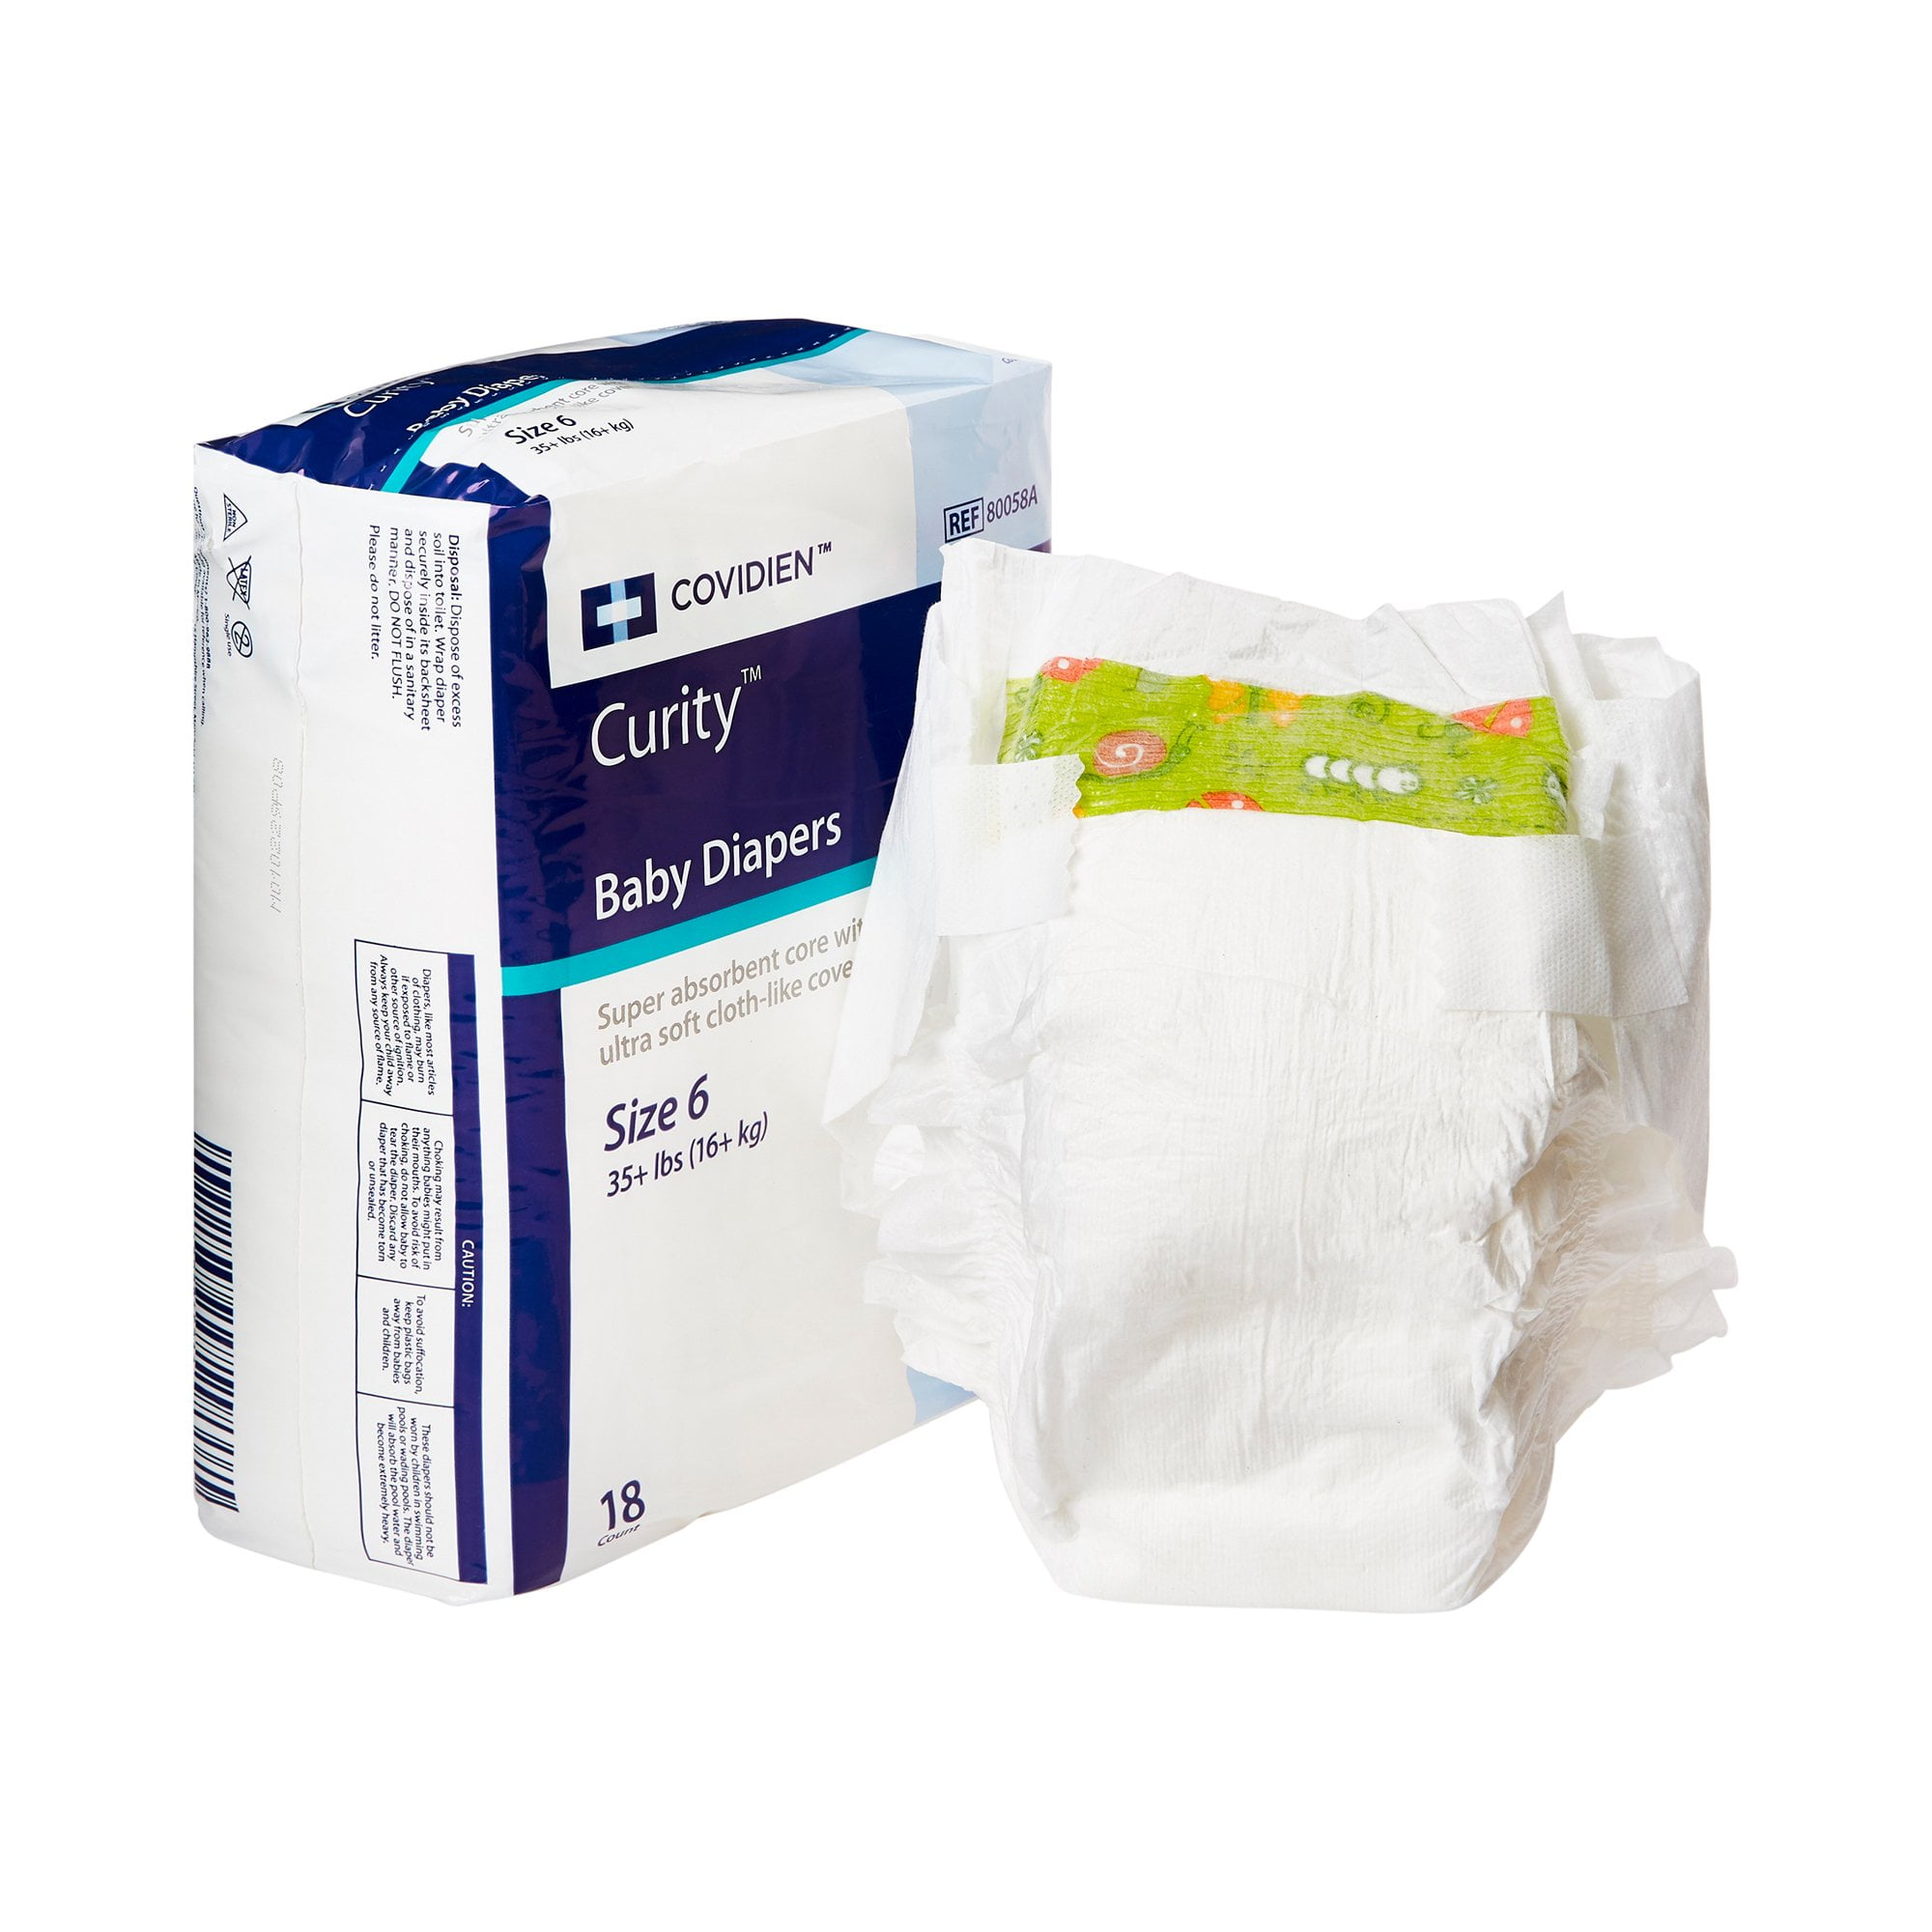 MCKDS Baby Diaper Tab Closure Size 7 Disposable Heavy Absorbency 